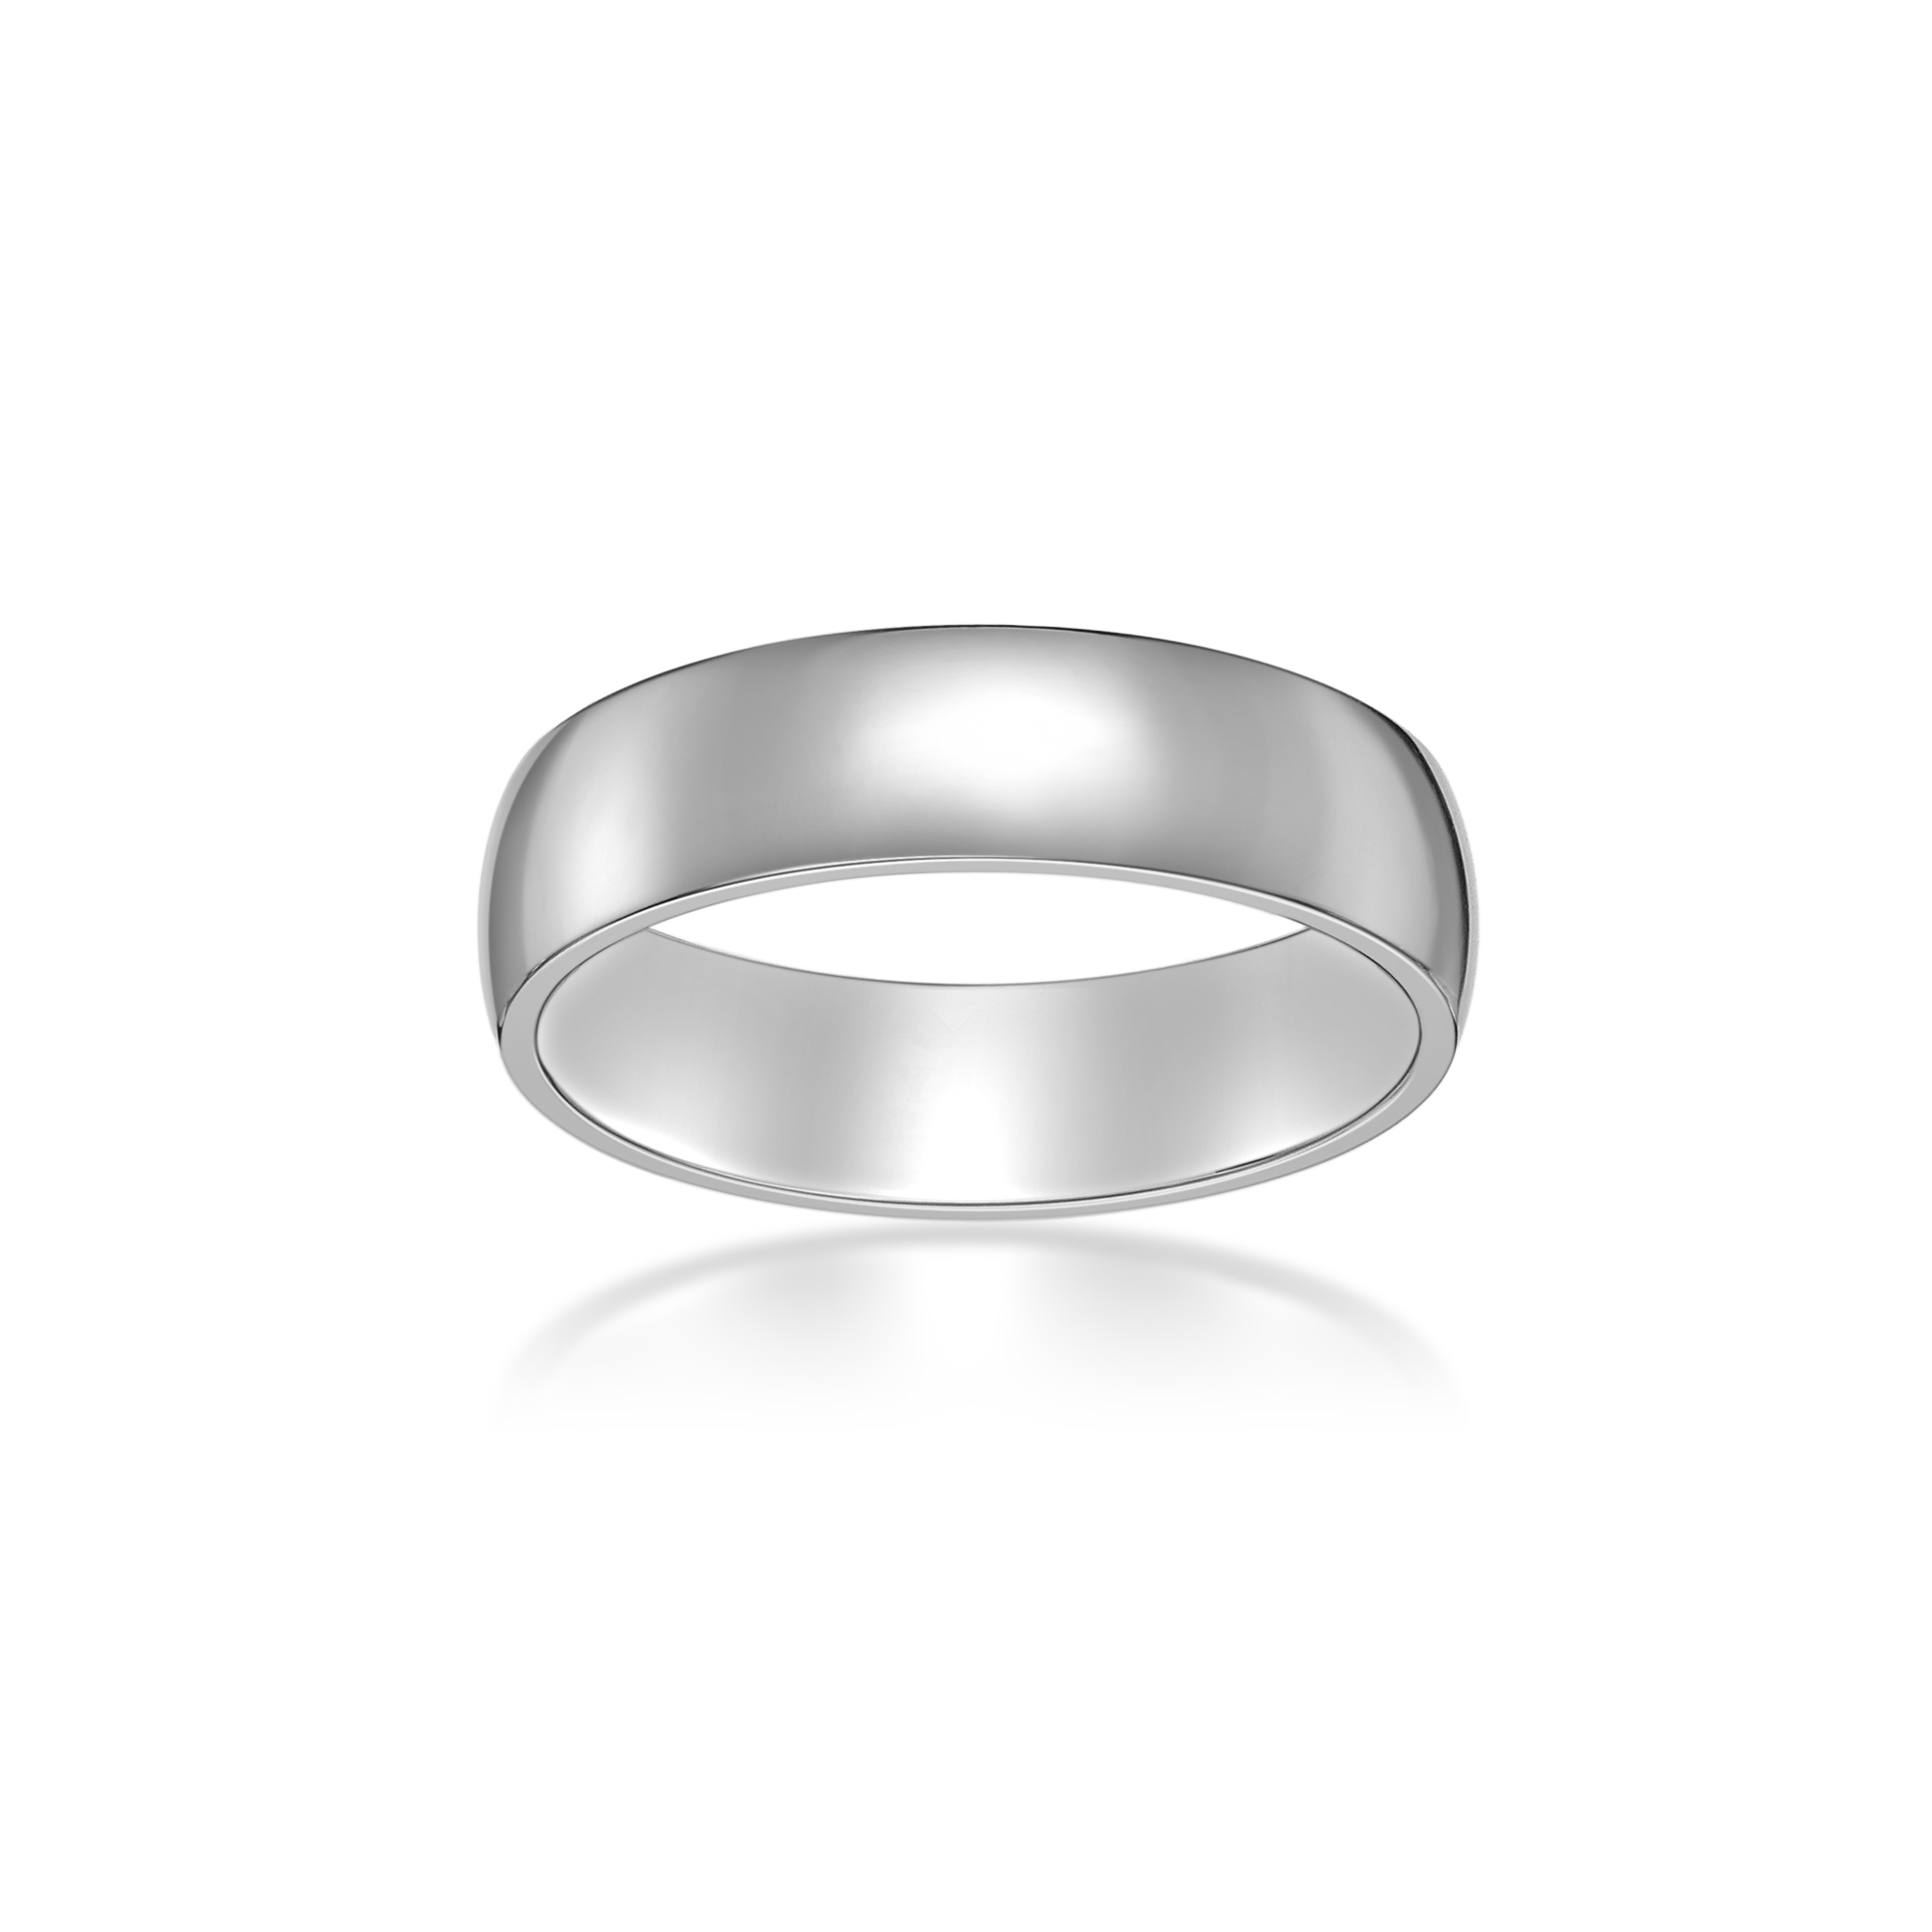 51637-ring-mens-collection-stainless-steel-.jpg